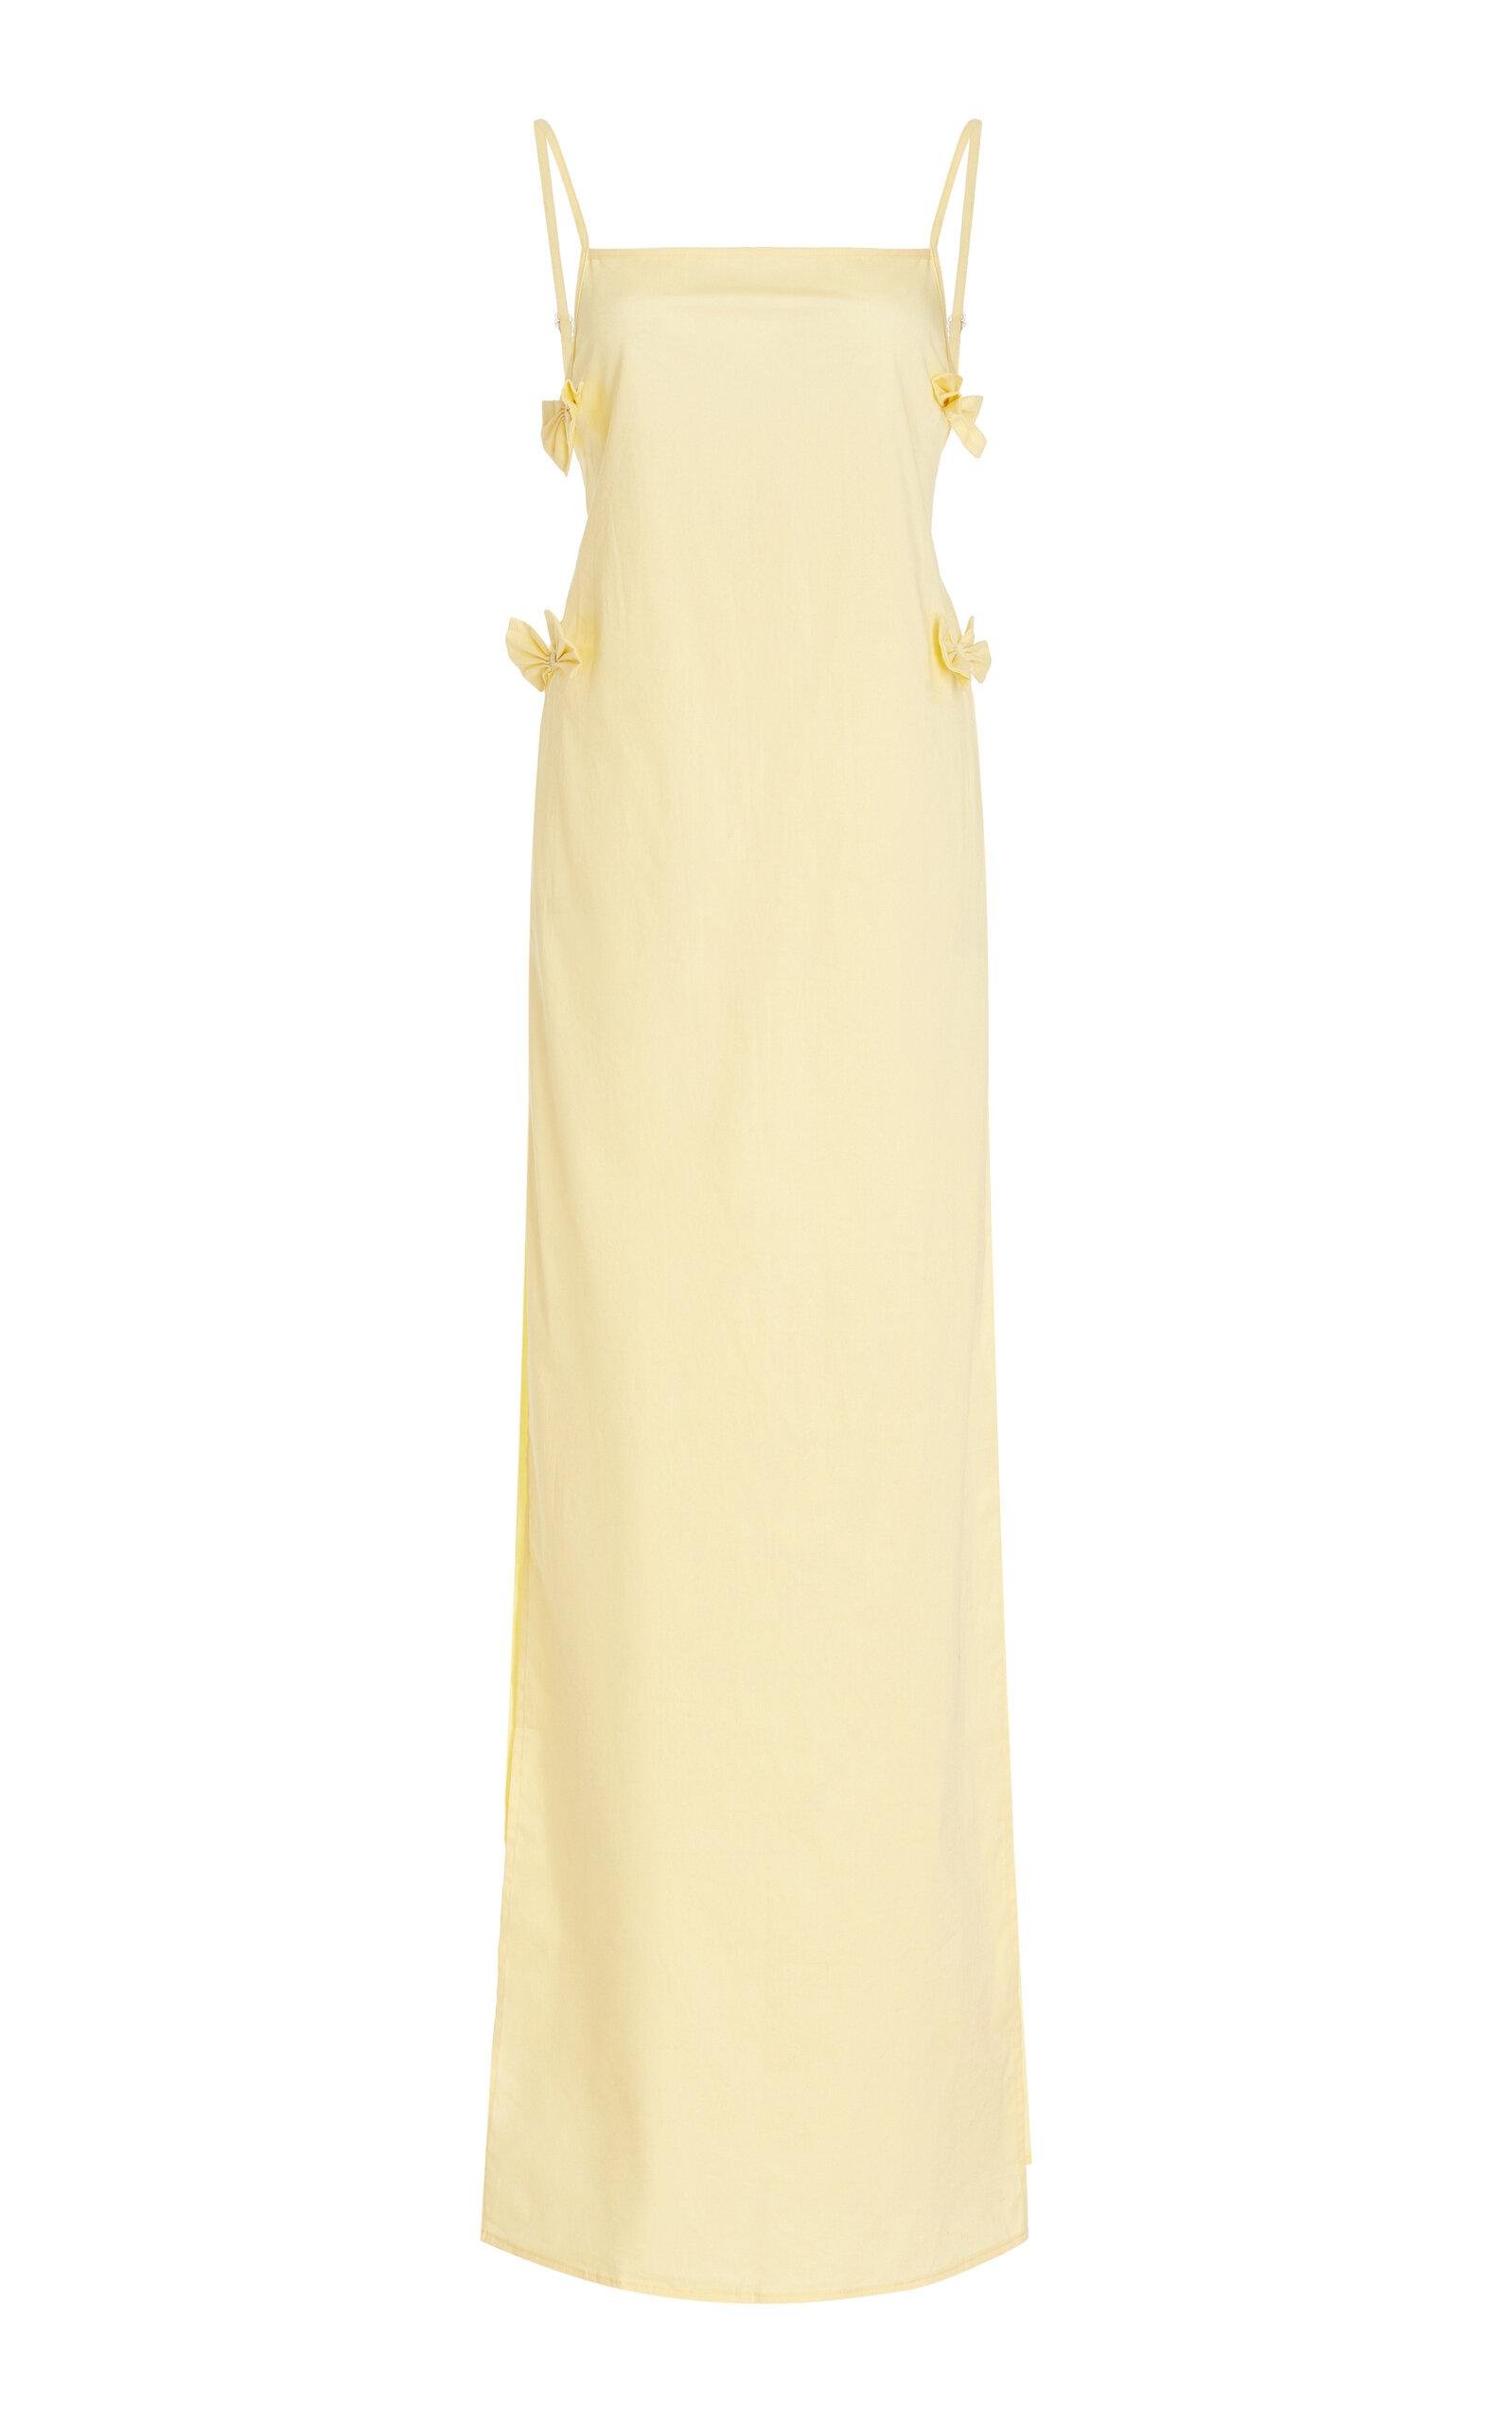 House of Aama - Exclusive Bow-Detailed Cotton-Blend Maxi Dress - Yellow - US 6 - Moda Operandi by HOUSE OF AAMA